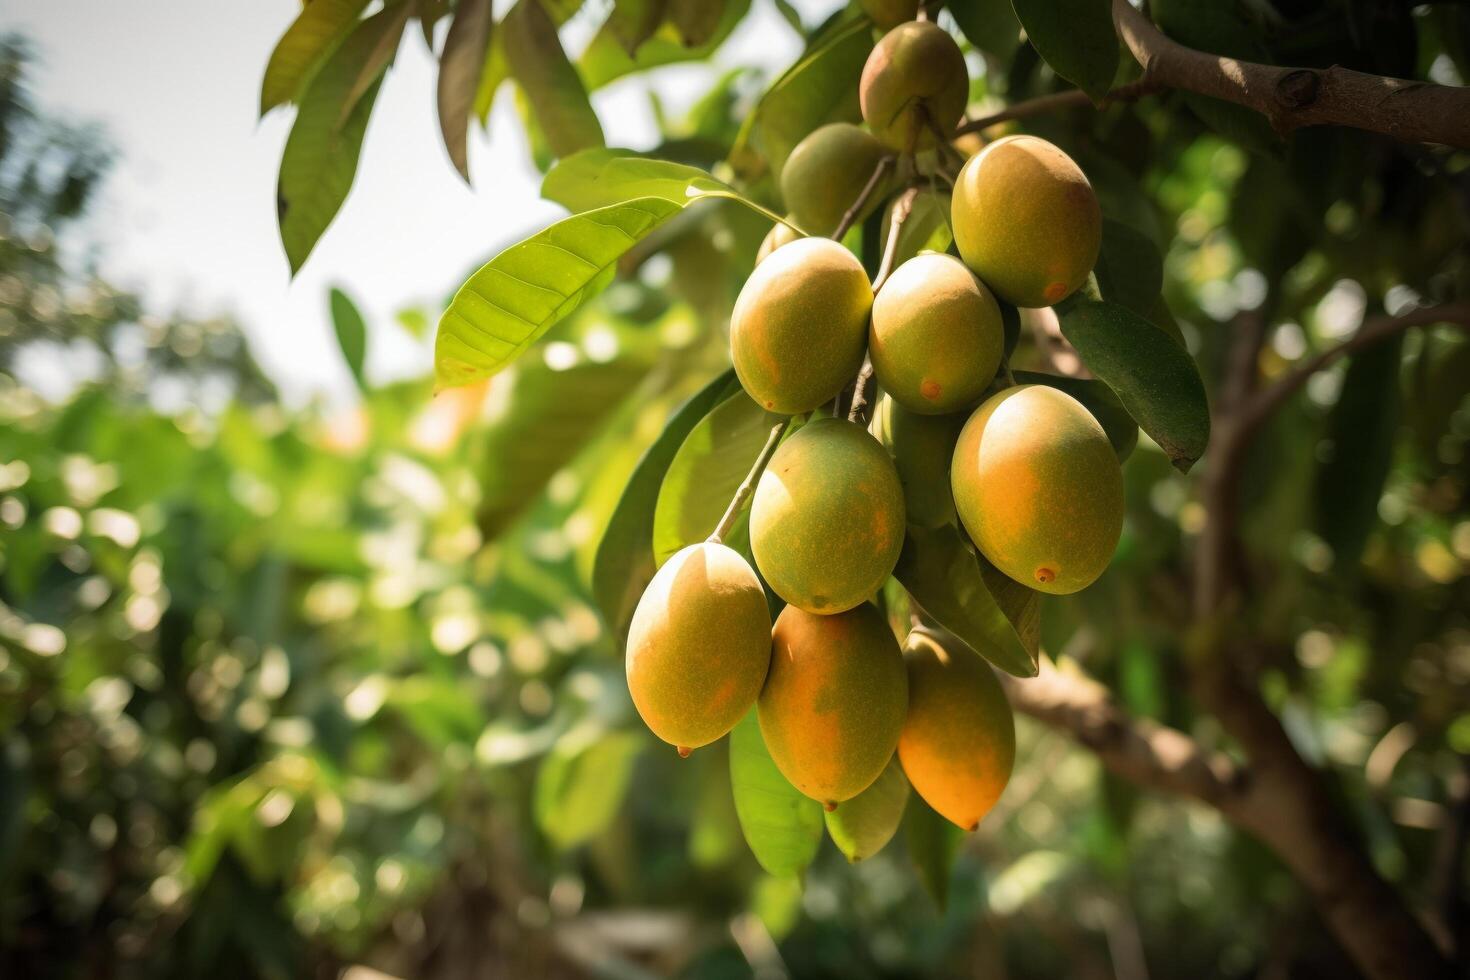 A photo of a tree with some ripe mangoes on it,